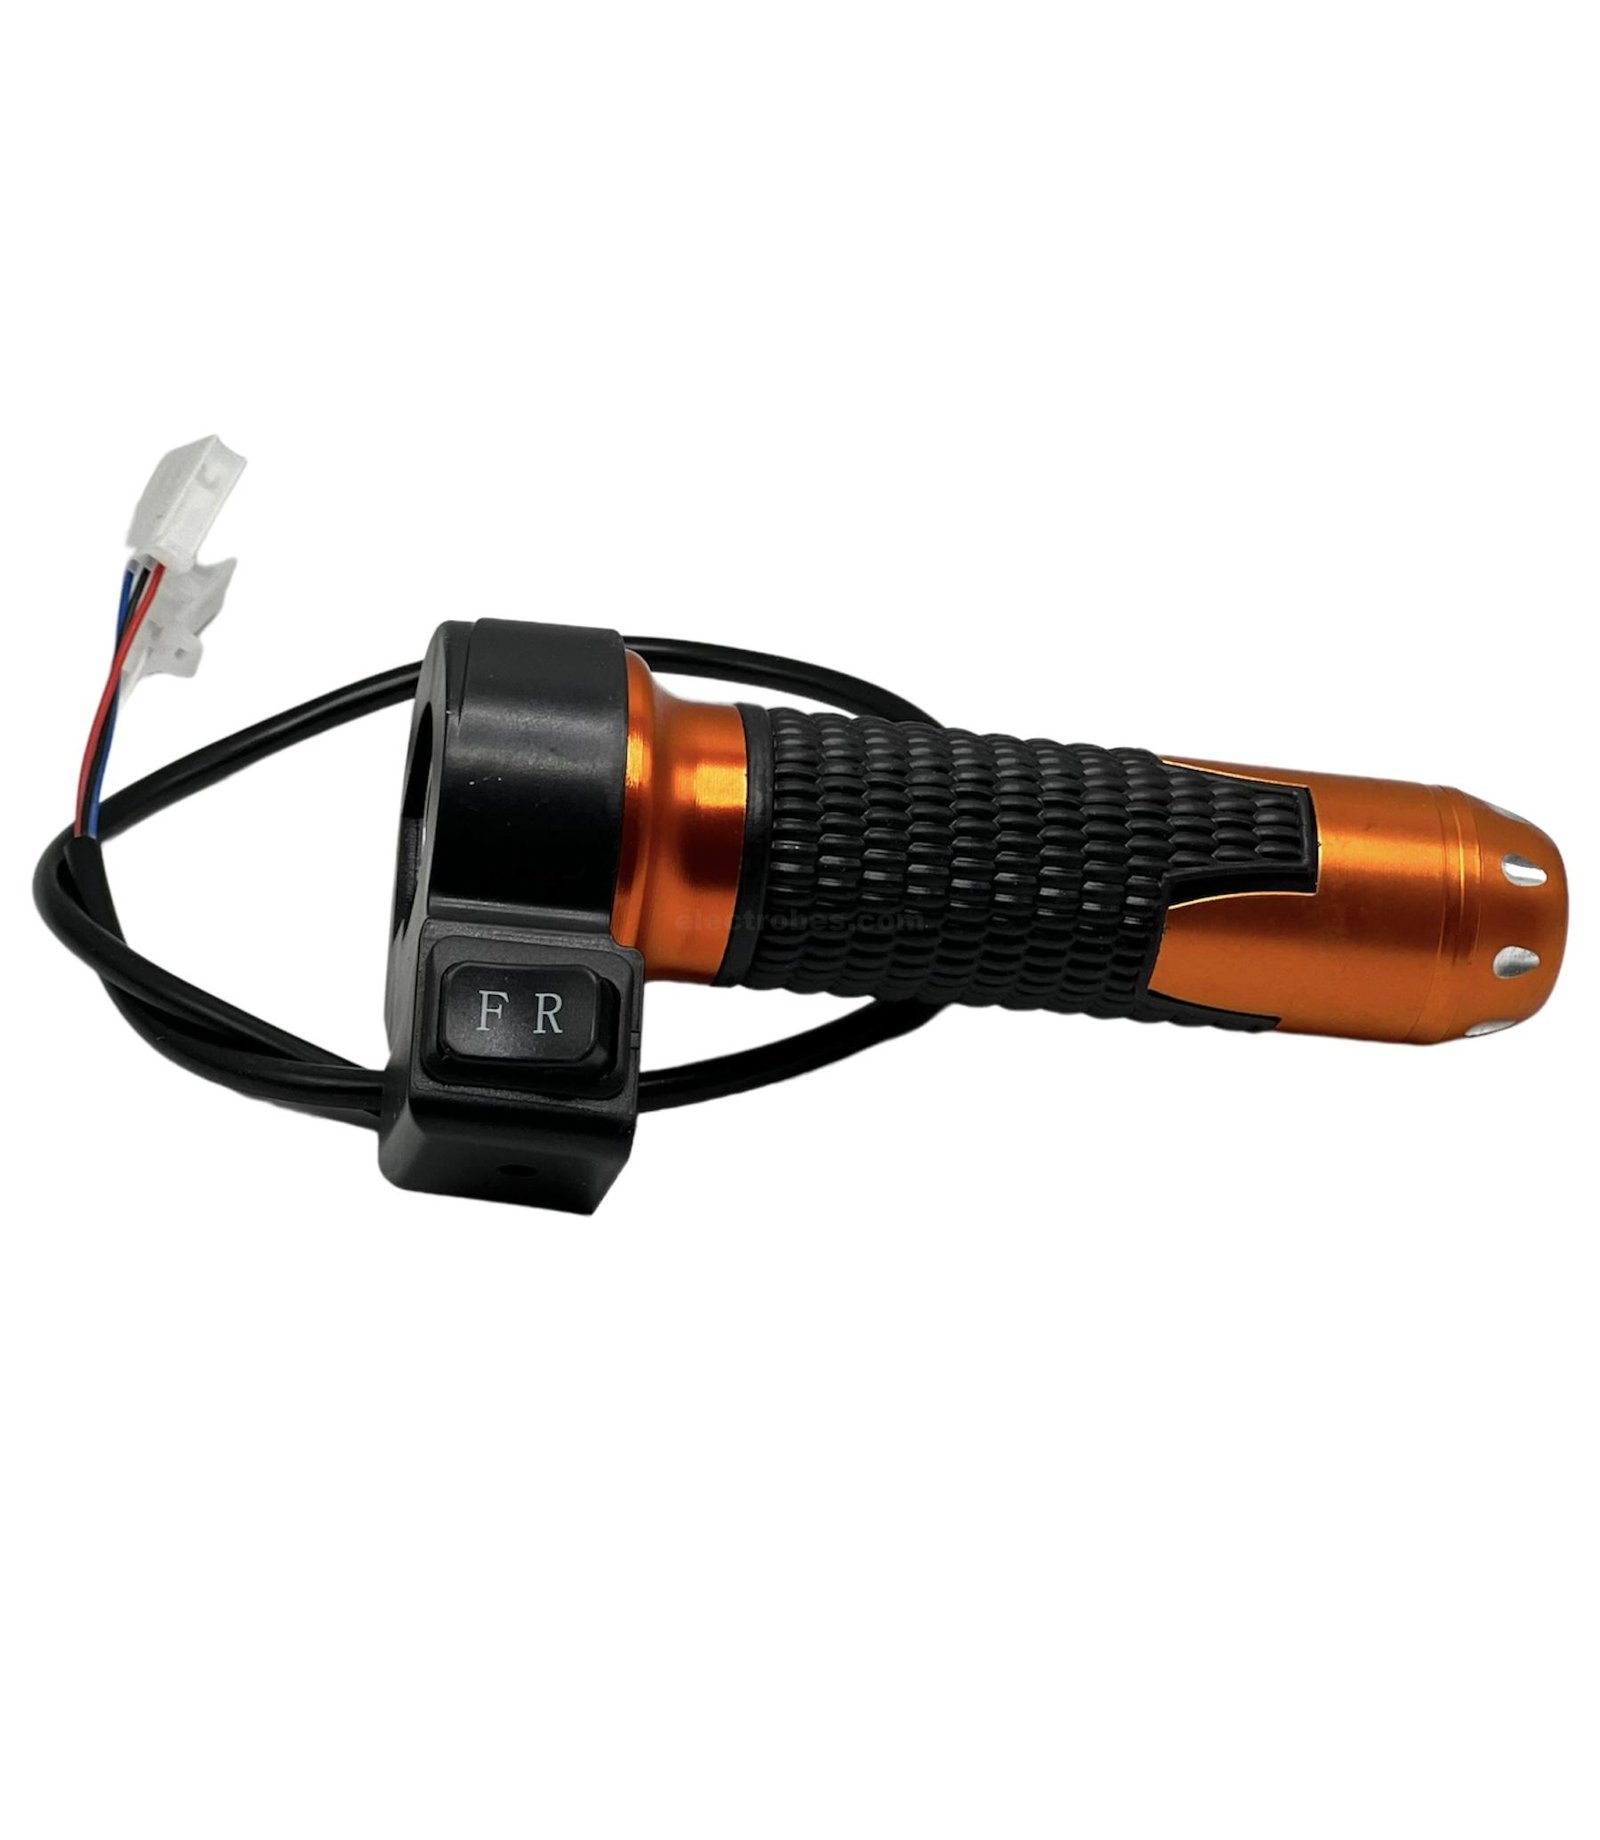 12V 24V 48V 60V 72V Red Copper Throttle handle bar with switches and wires set for electric bike e-bike at best price online in islamabad rawalpindi lahore karachi multan sukkur skardu peshawar taxila wah gujranwala faisalabad hyderabad quetta pakistan